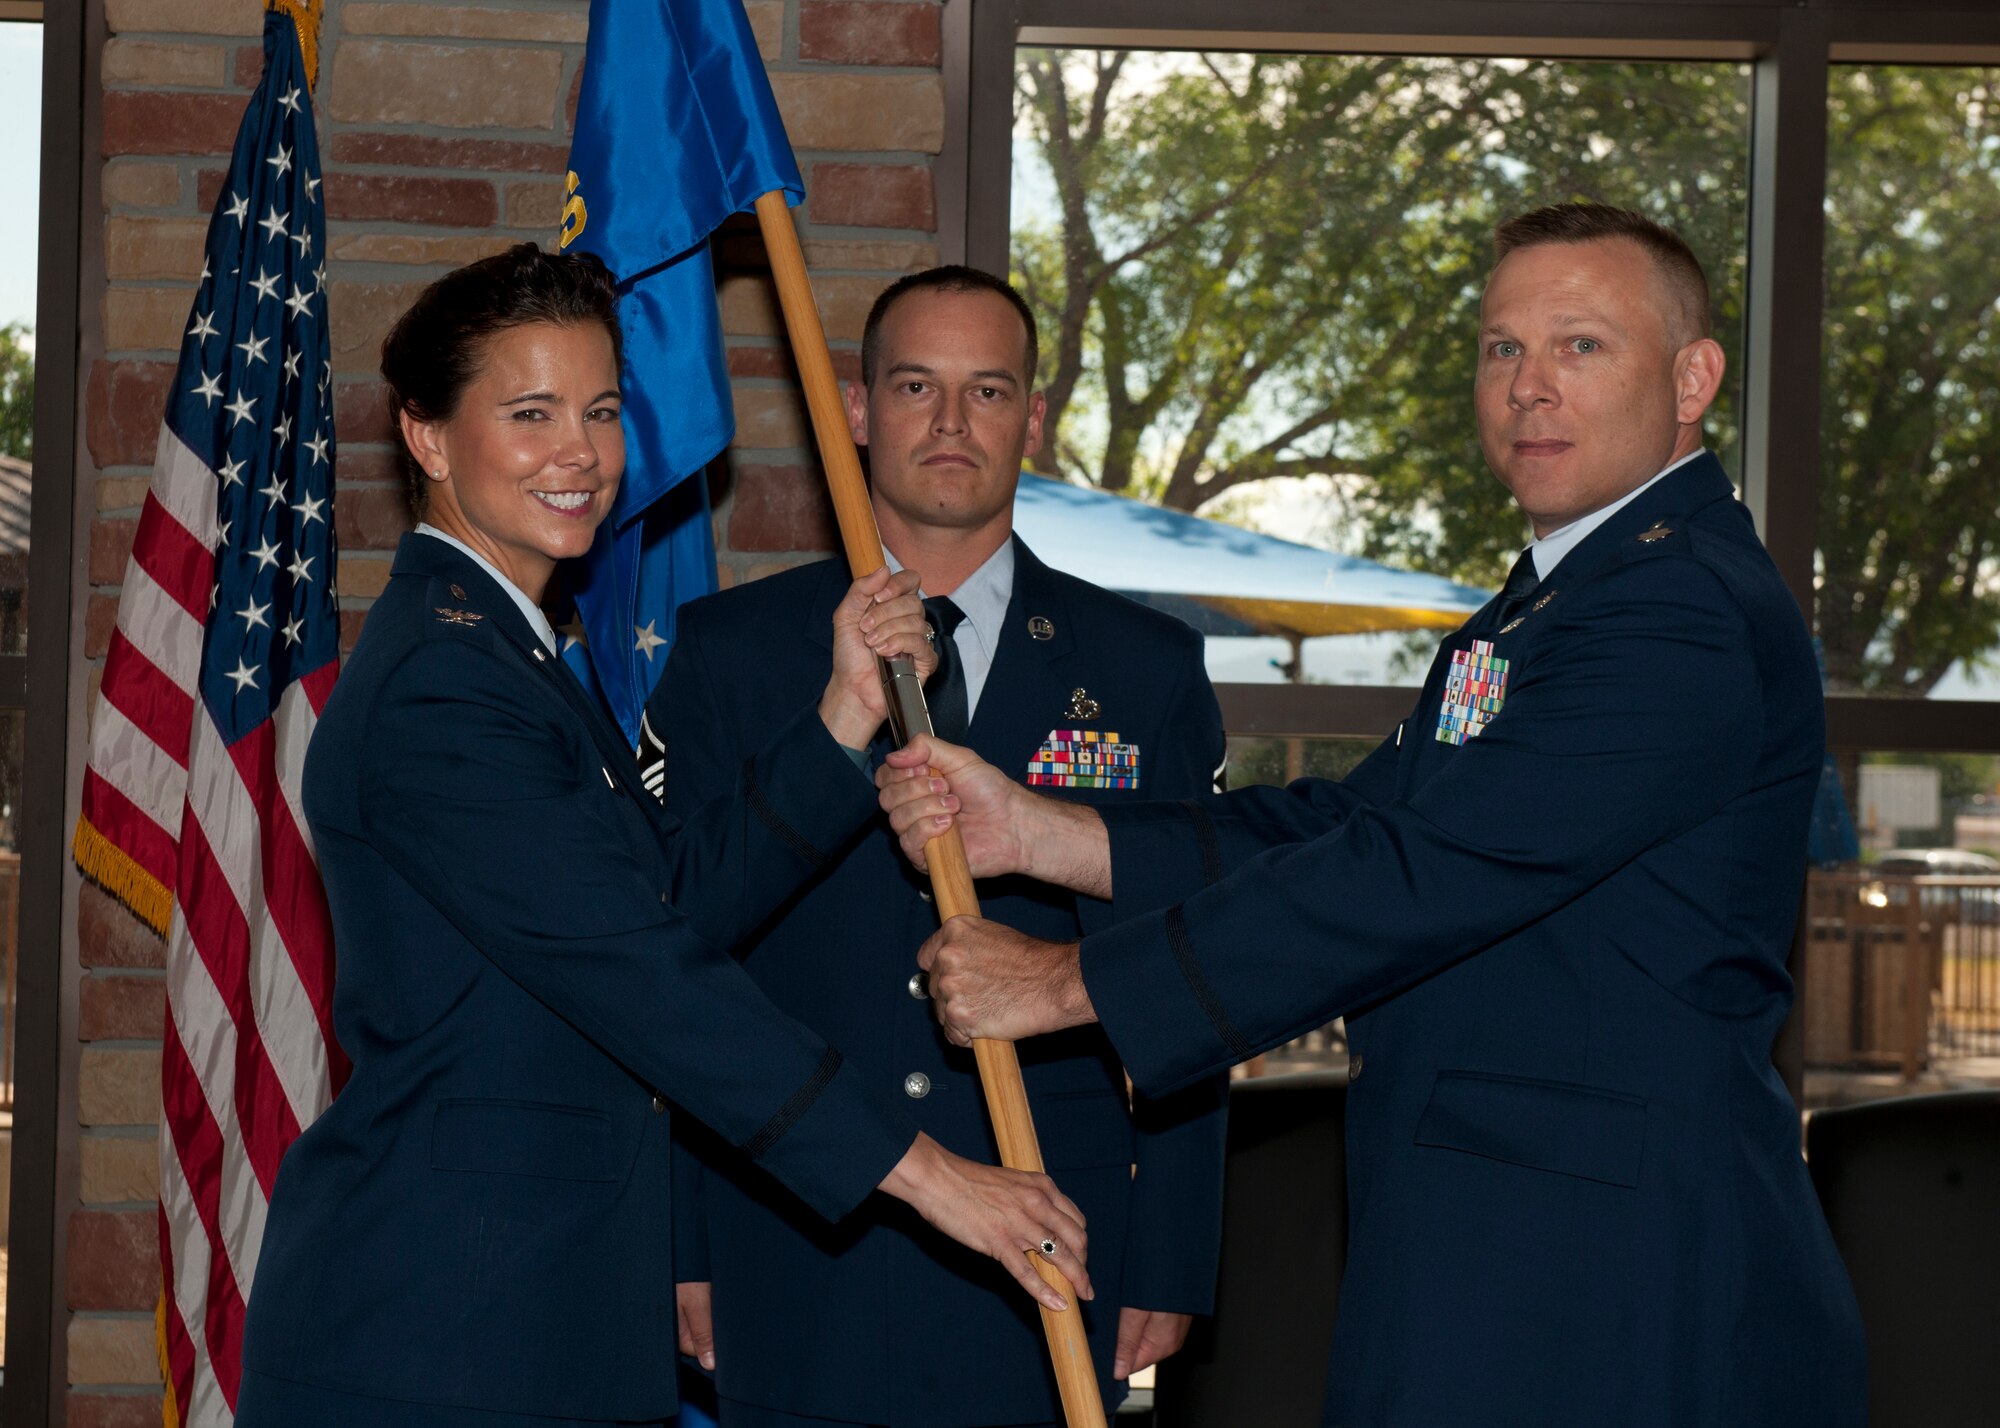 Lt. Col. Elbert Alford, the incoming 49th Medical Support Squadron commander, receives the unit’s guidon from Col. Leslie A. Knight, the 49th Medical Group commander, during the unit’s change of command ceremony at Holloman Air Force Base, N.M., July 7, 2015. Alford will lead the unit’s 77 active duty and civilian personnel who maintain the operation of all medical support activities, medical readiness items, facility management, and pharmacy operations. (U.S. Air Force photo by Senior Airman Chase Cannon/Released)